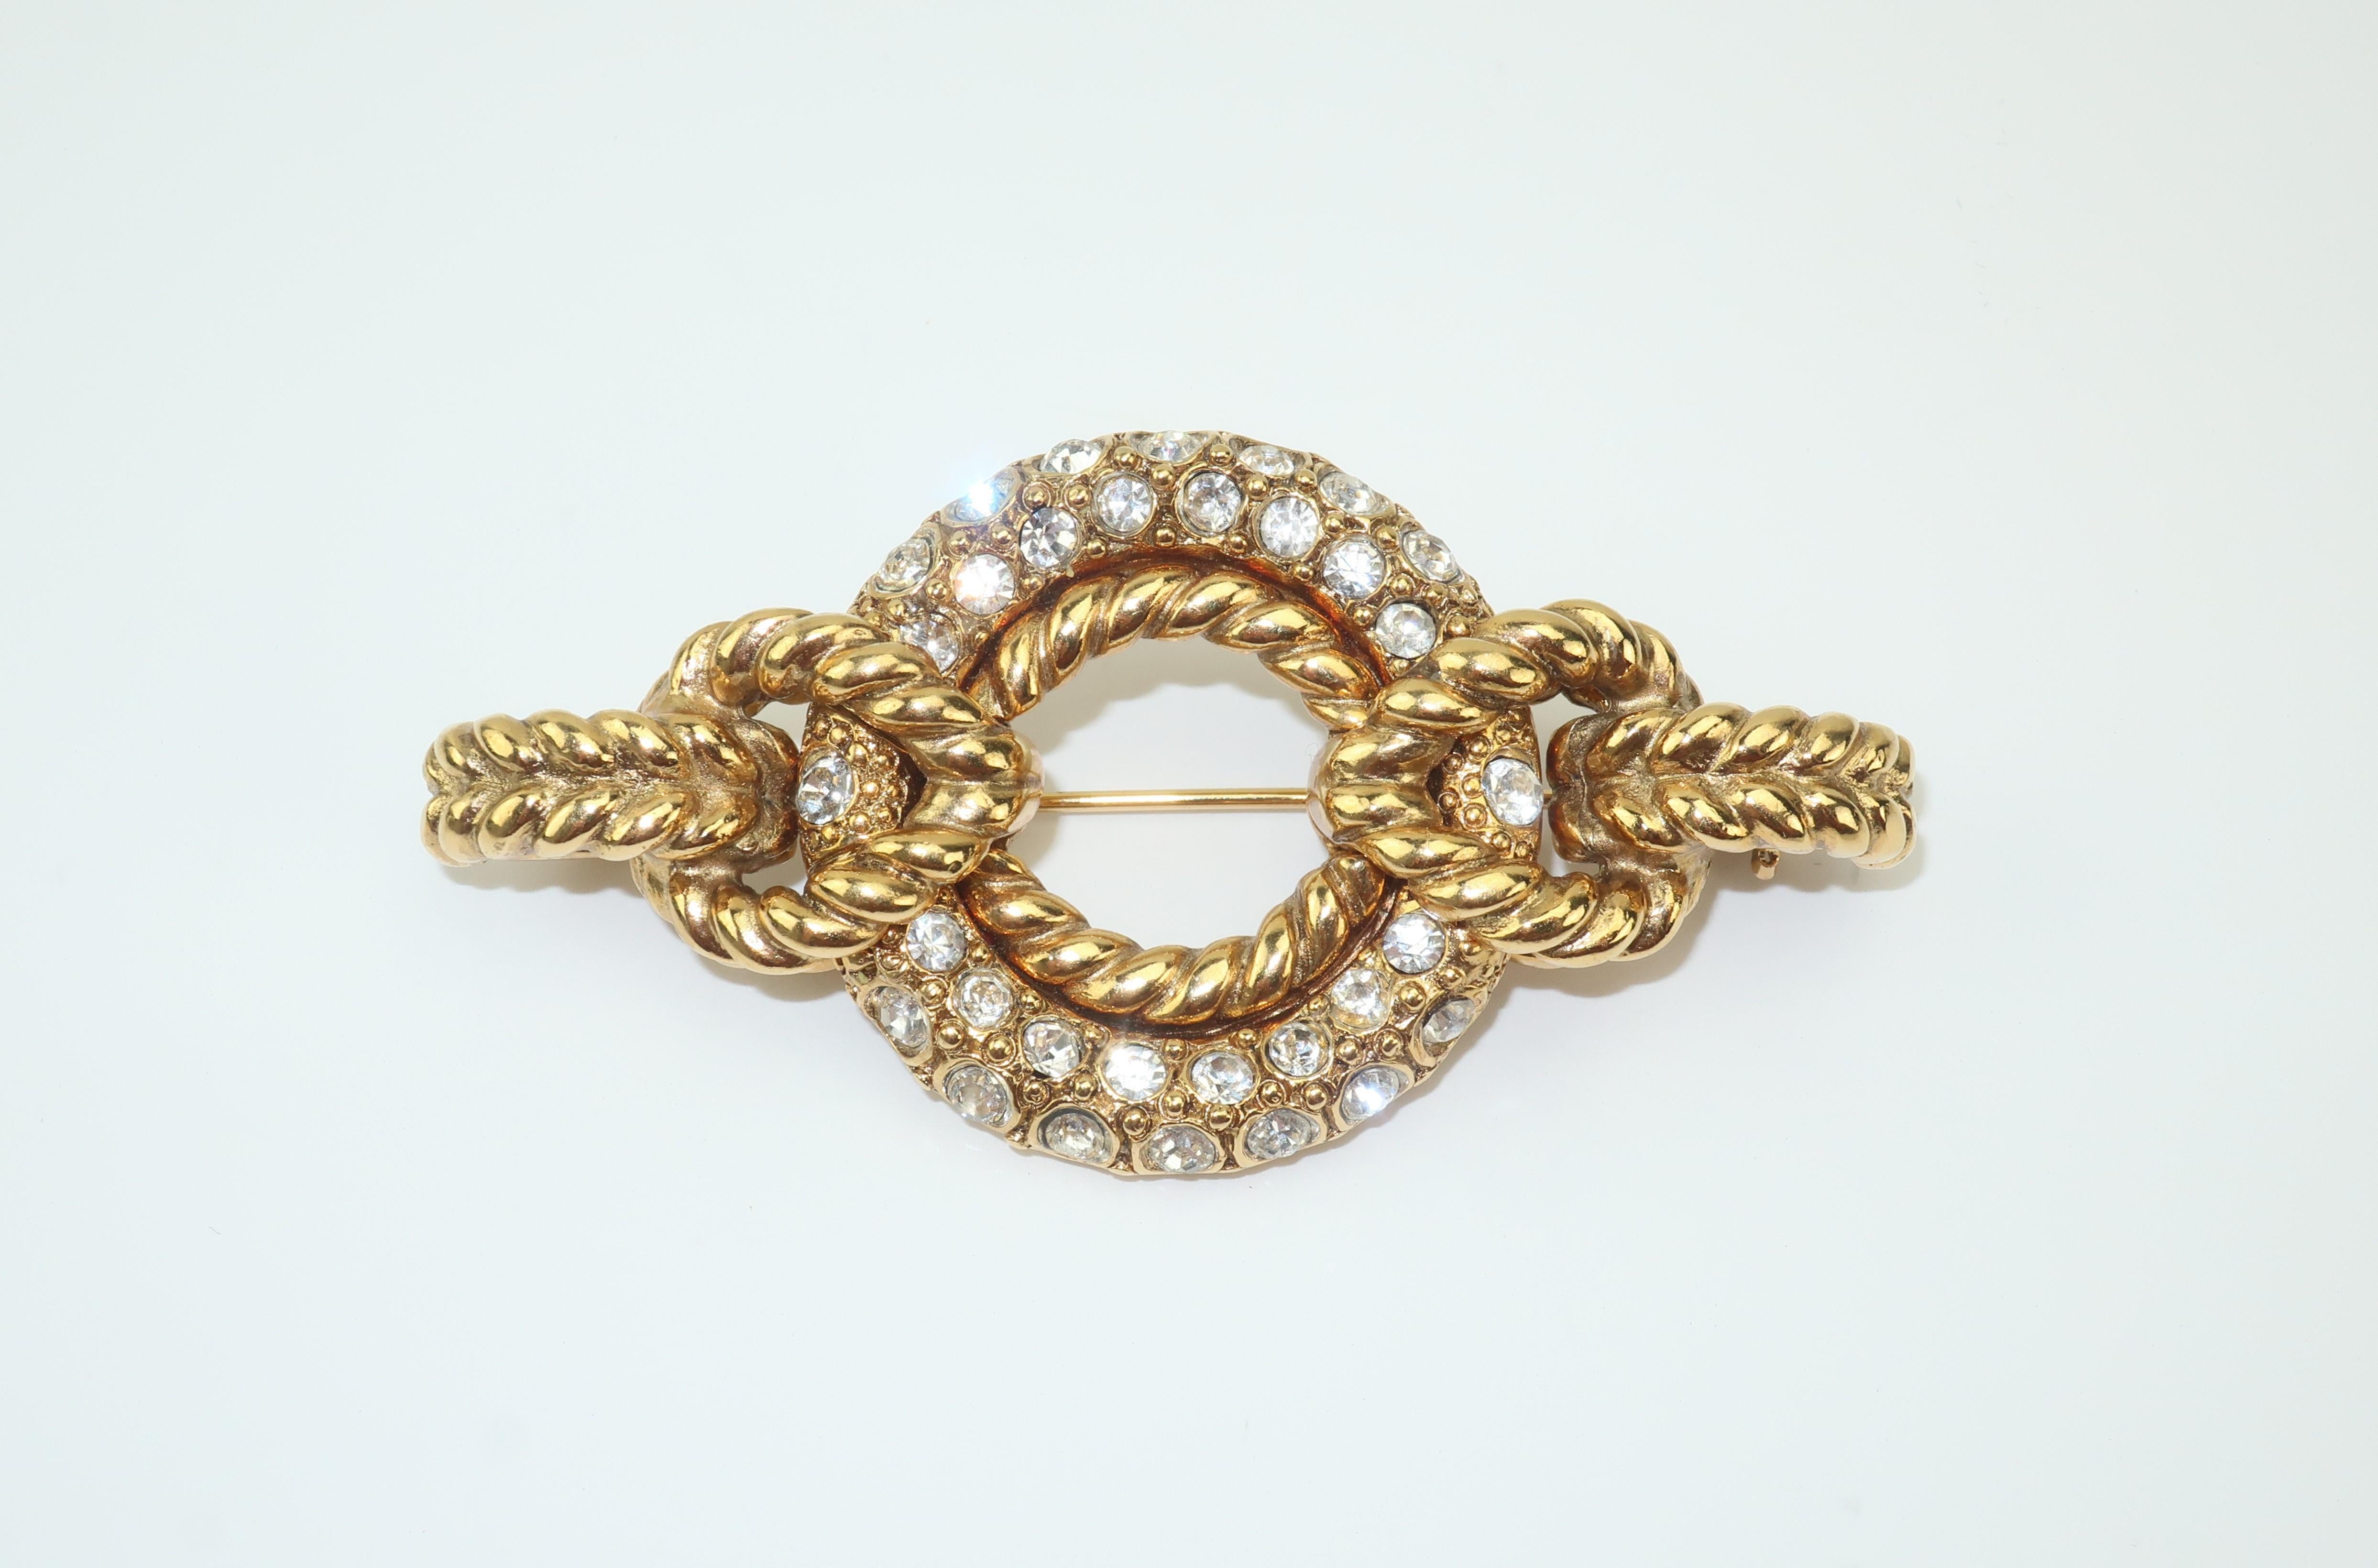 Robert Goossens is a name synonymous with the opulent costume jewelry produced for great Parisian fashion houses such as Chanel and Yves Saint Laurent.  This 1980's brooch is a nice example of his stylish work with a chunky statement making gold